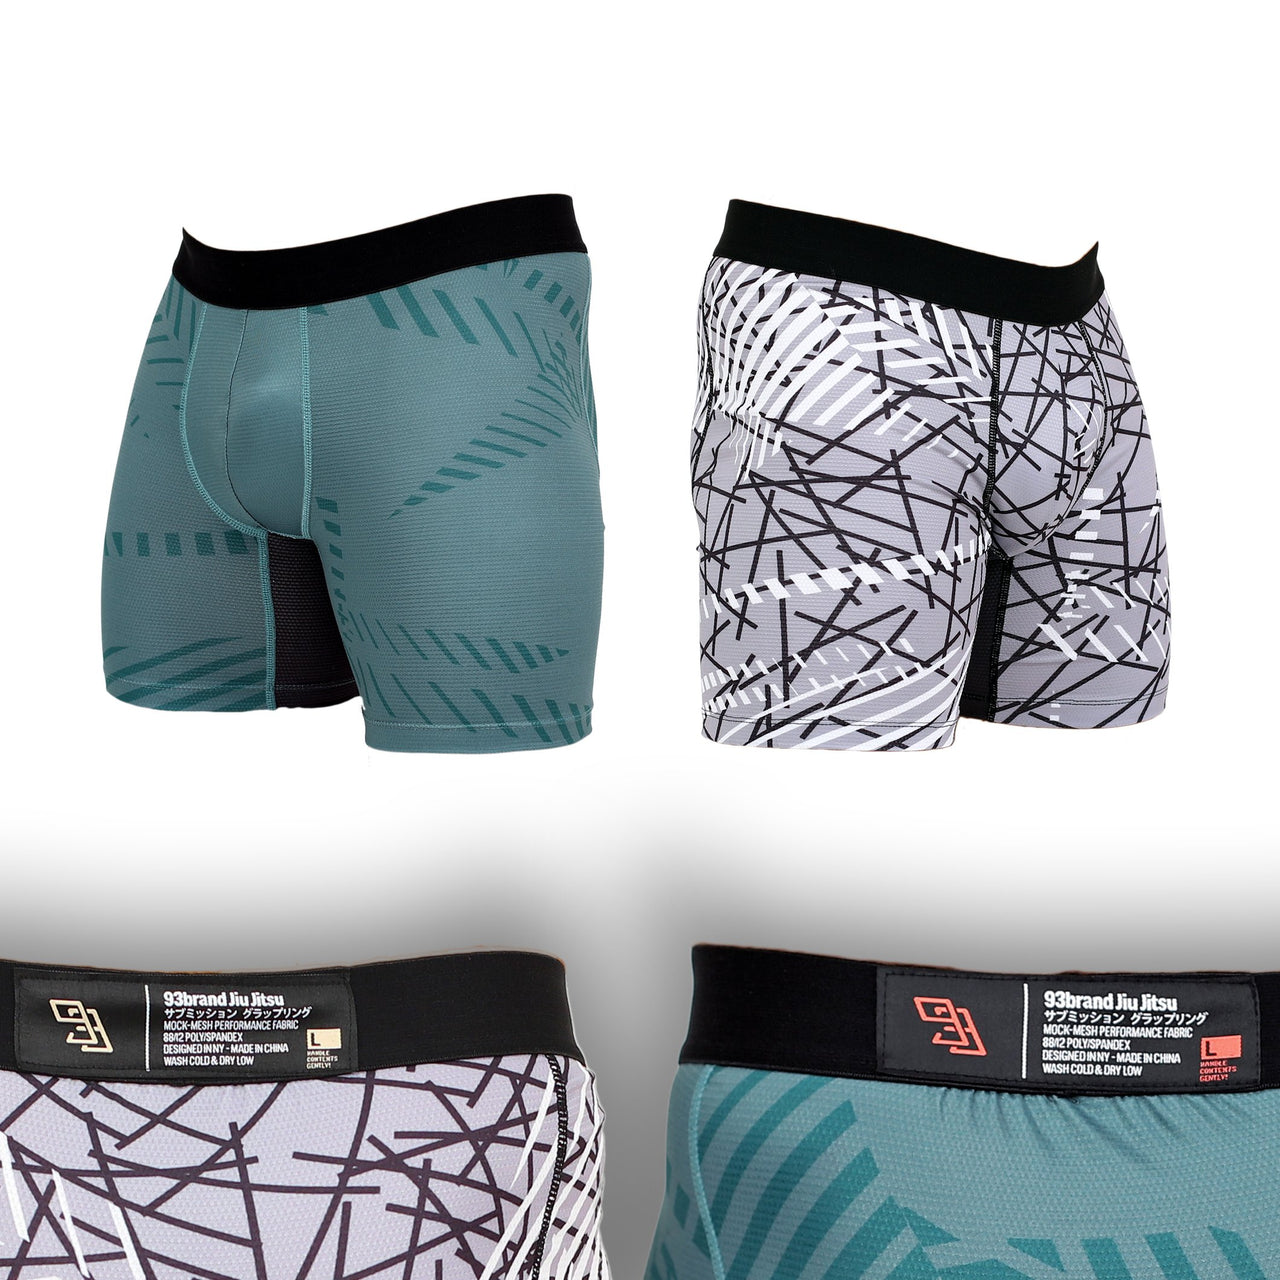 93brand Special Edition V3 Grappling Underwear 2-PACK